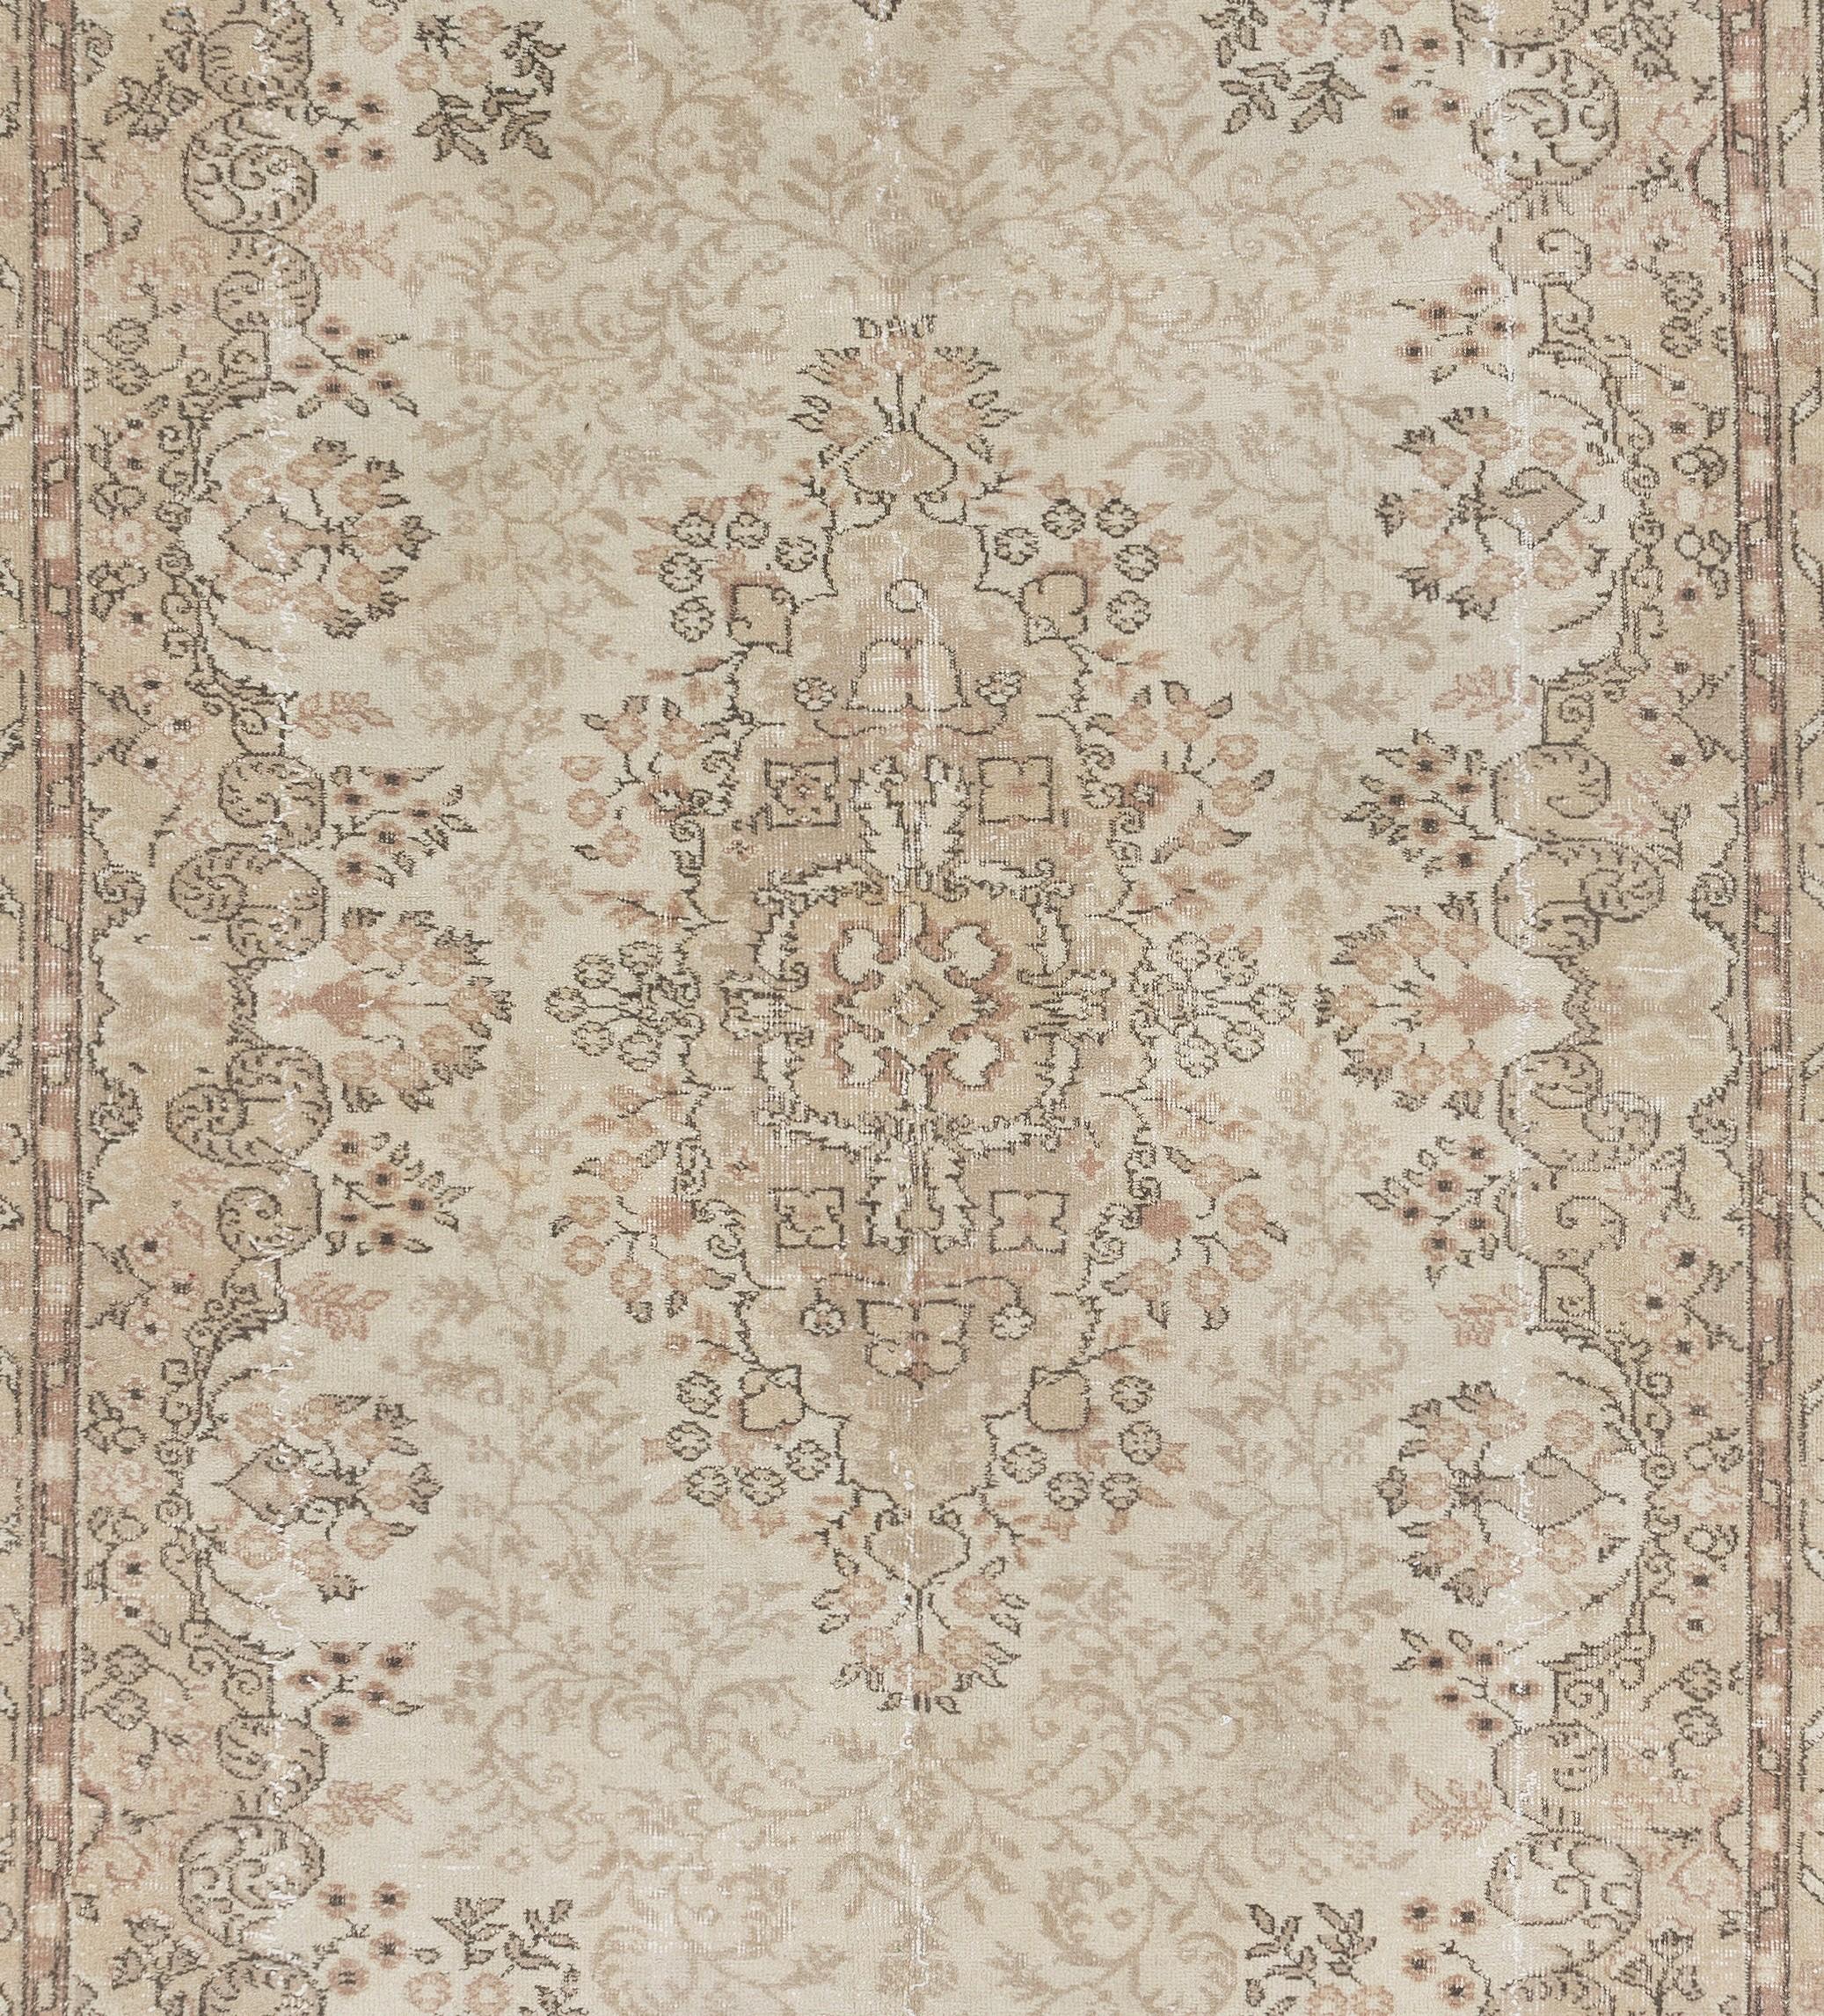 Cotton Vintage Hand-Knotted Oushak Area Rug. 7.3x10.6 Ft Ideal for Office & Home decor For Sale